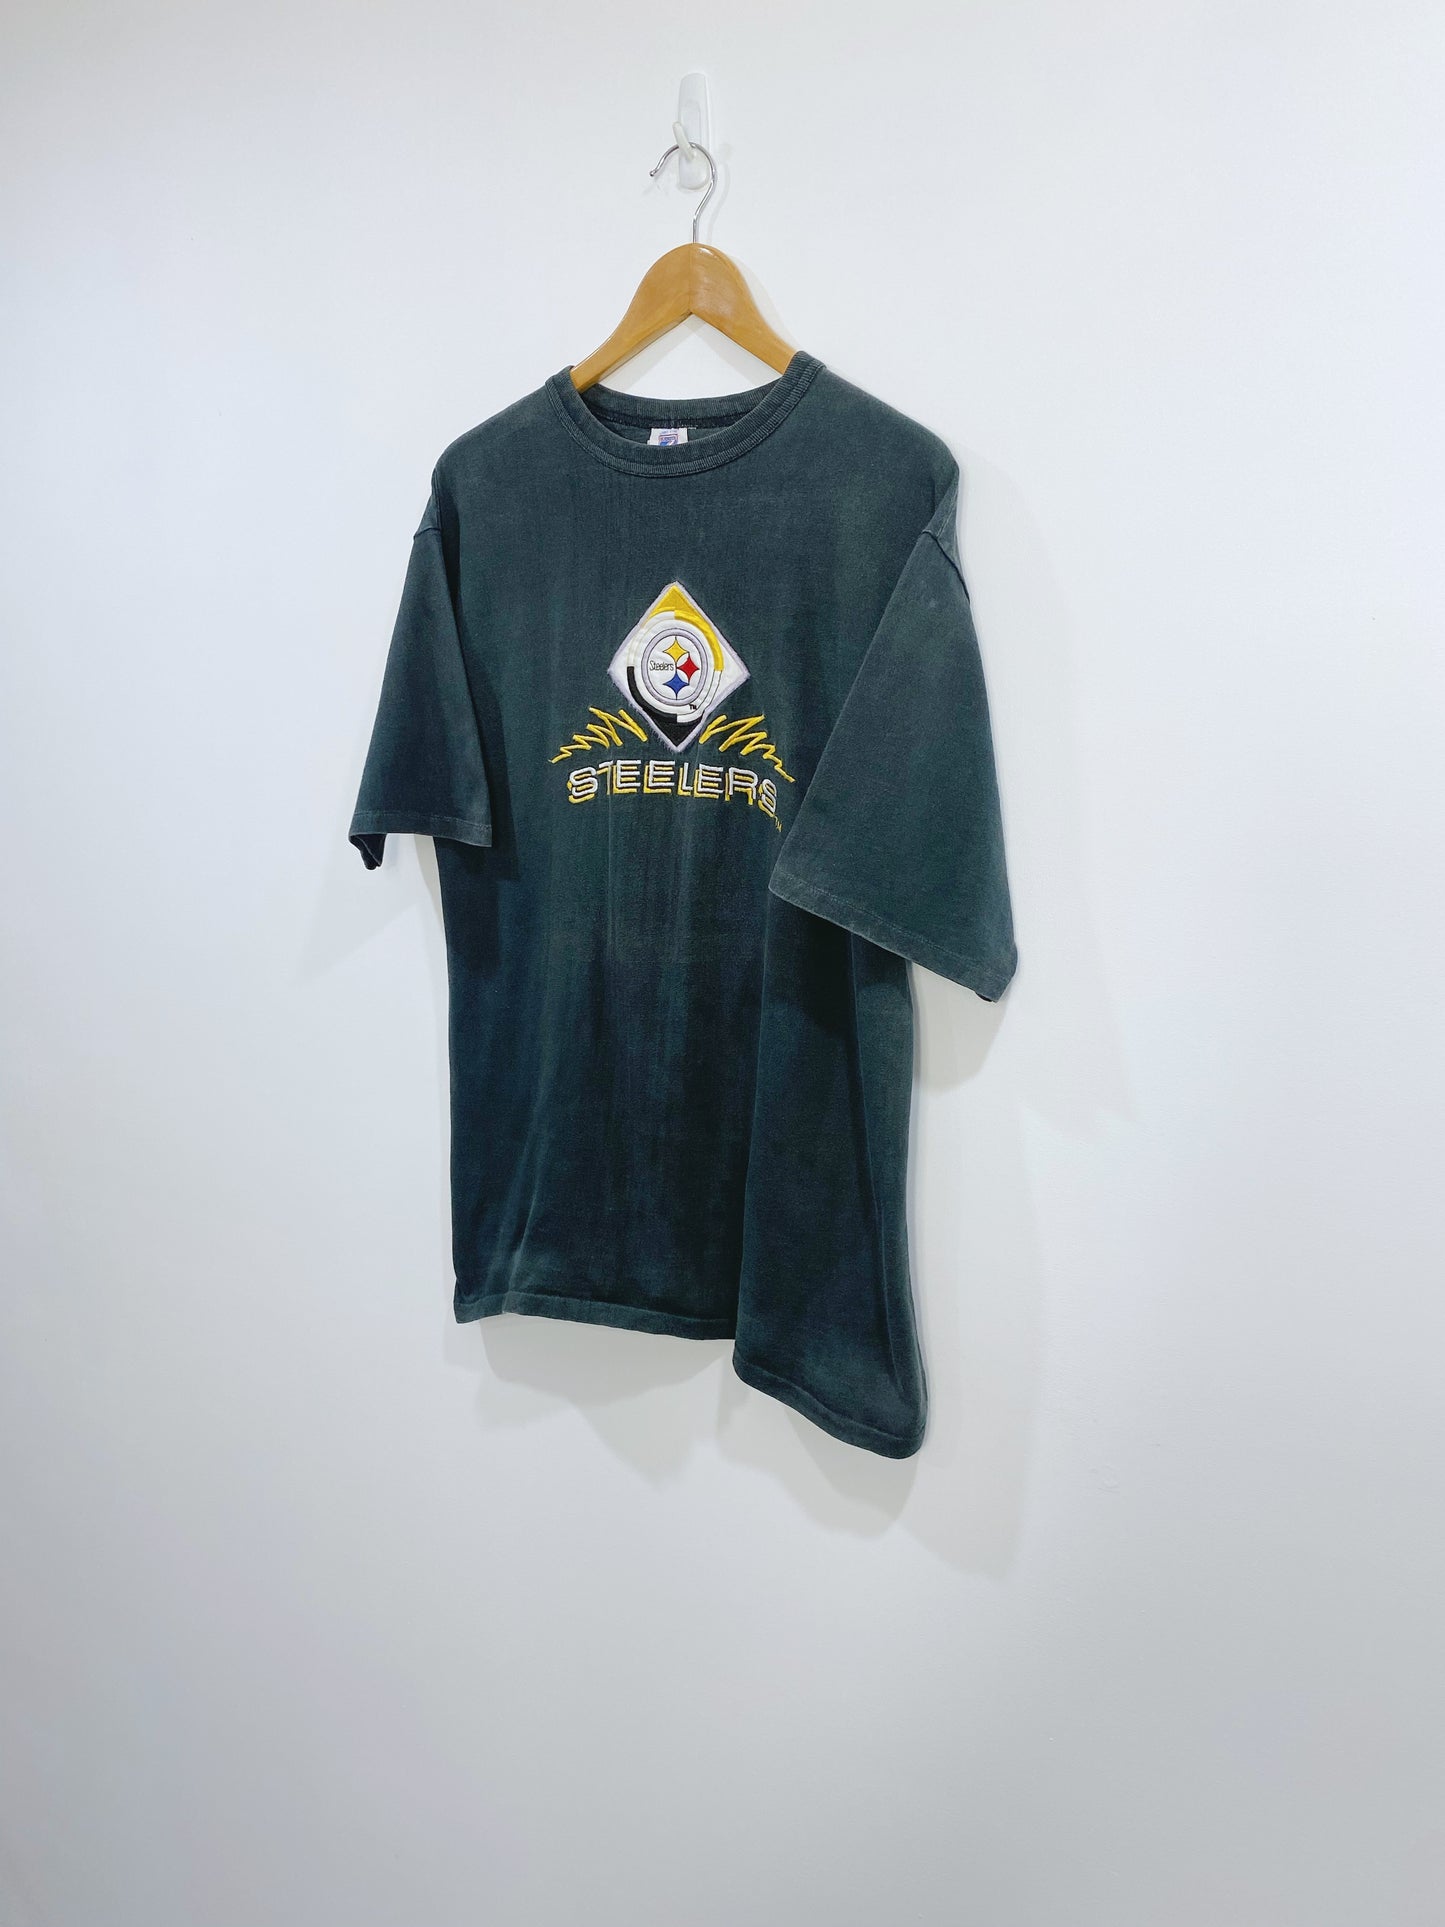 Vintage 90s Pittsburgh Steelers Embroidered T-shirt M